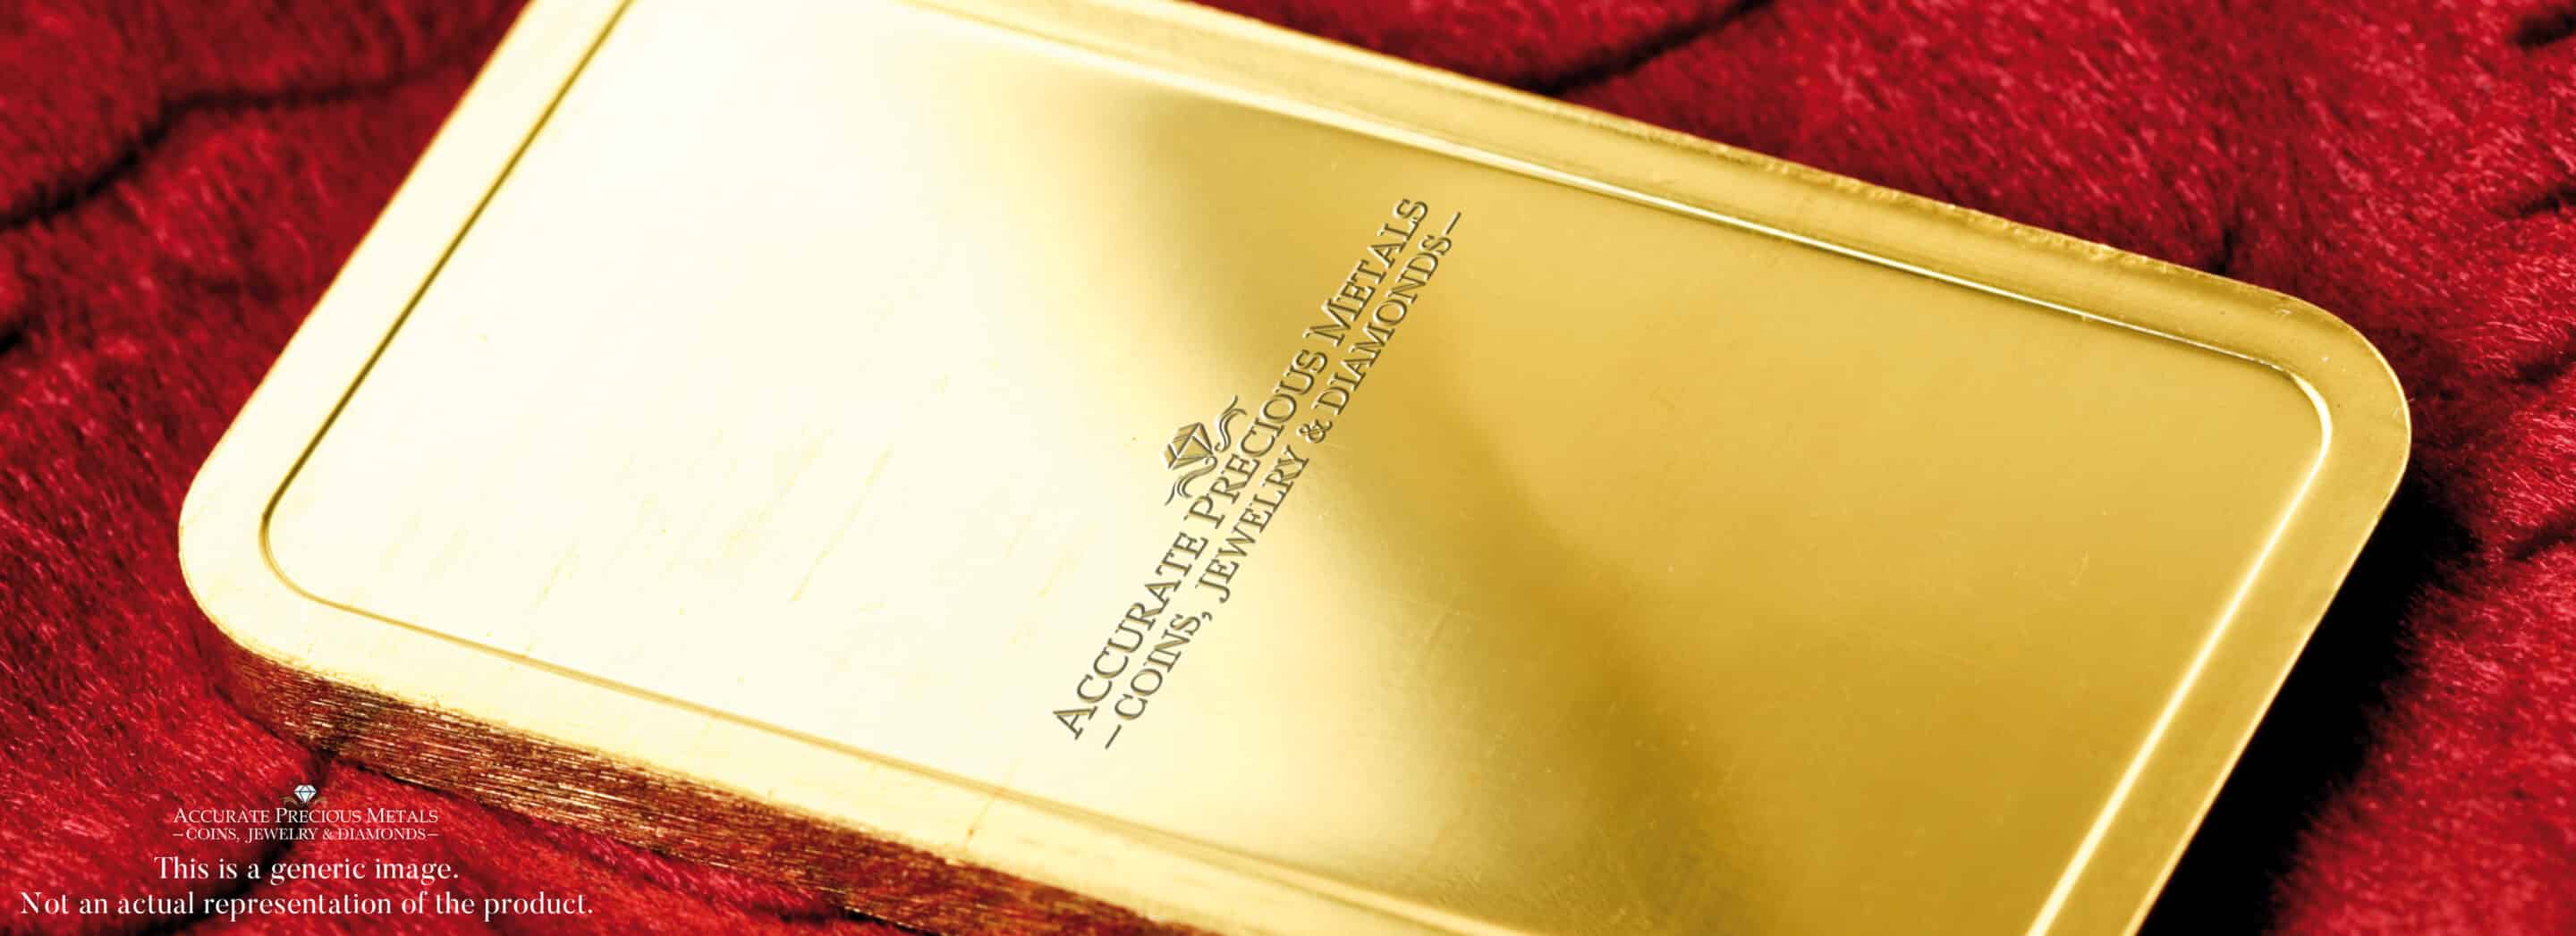 Shining Perth Mint 1/10 oz Gold Bar - Trusted Investment Choice